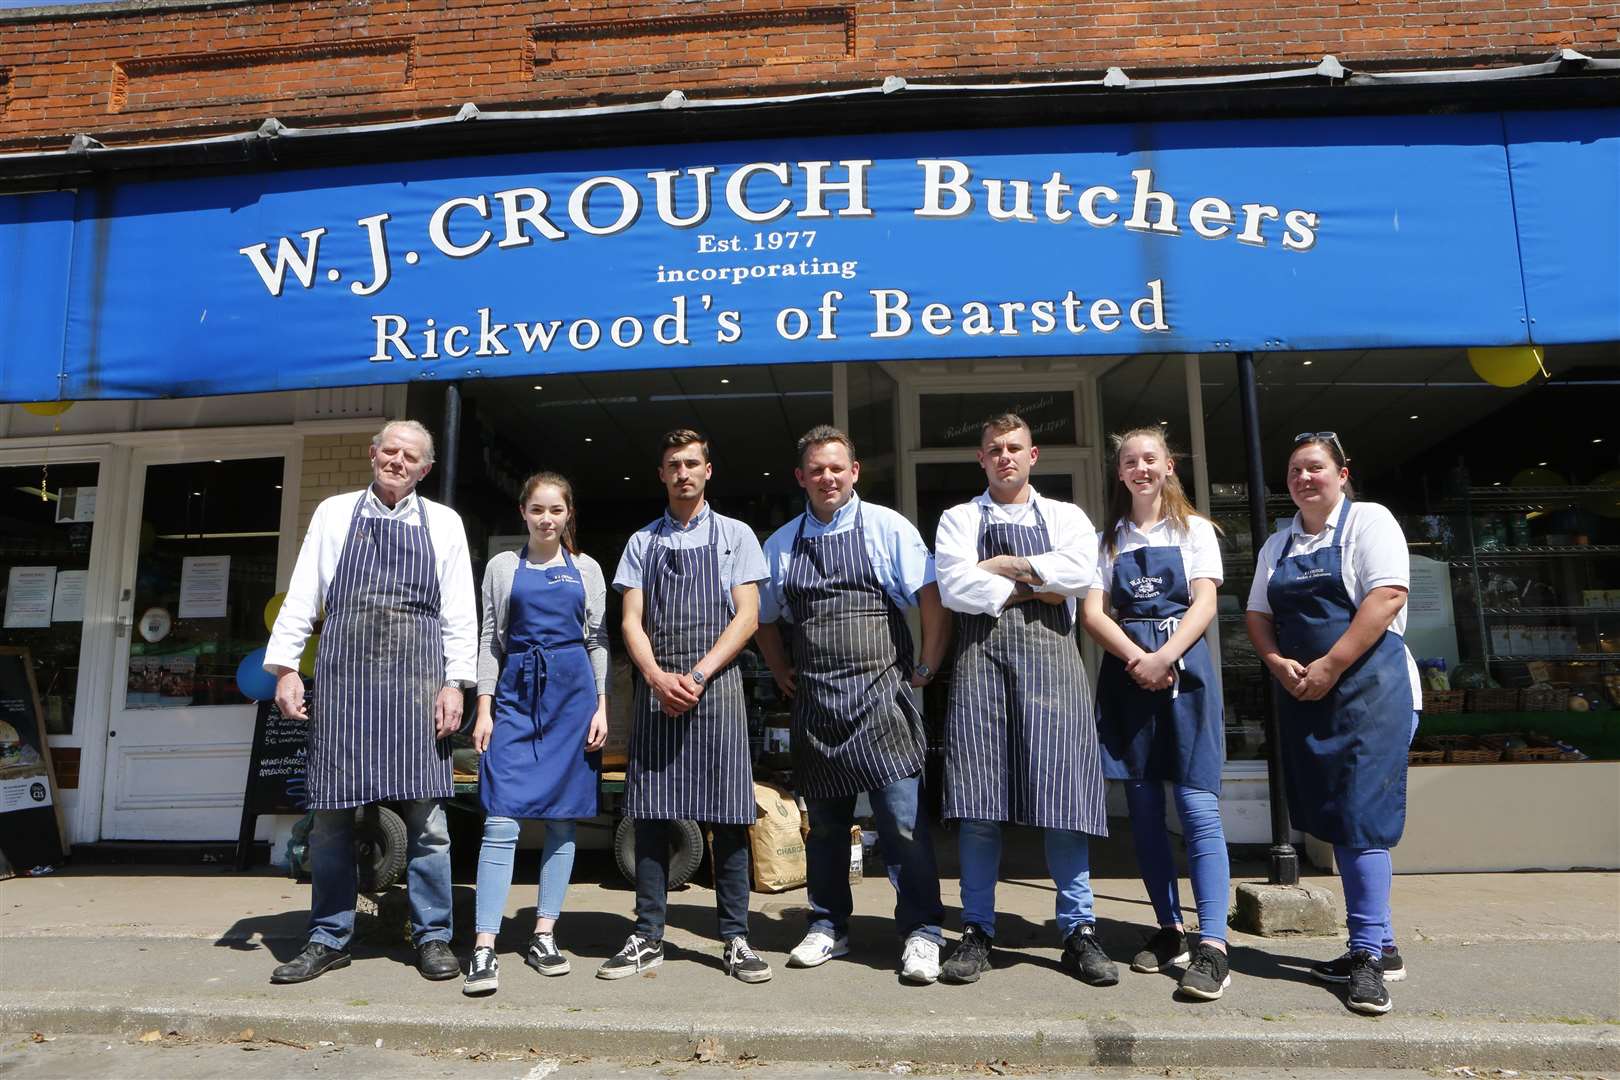 All smiles: The future of W.J.Crouch, Butchers, is secured after the family bought the freehold of the building